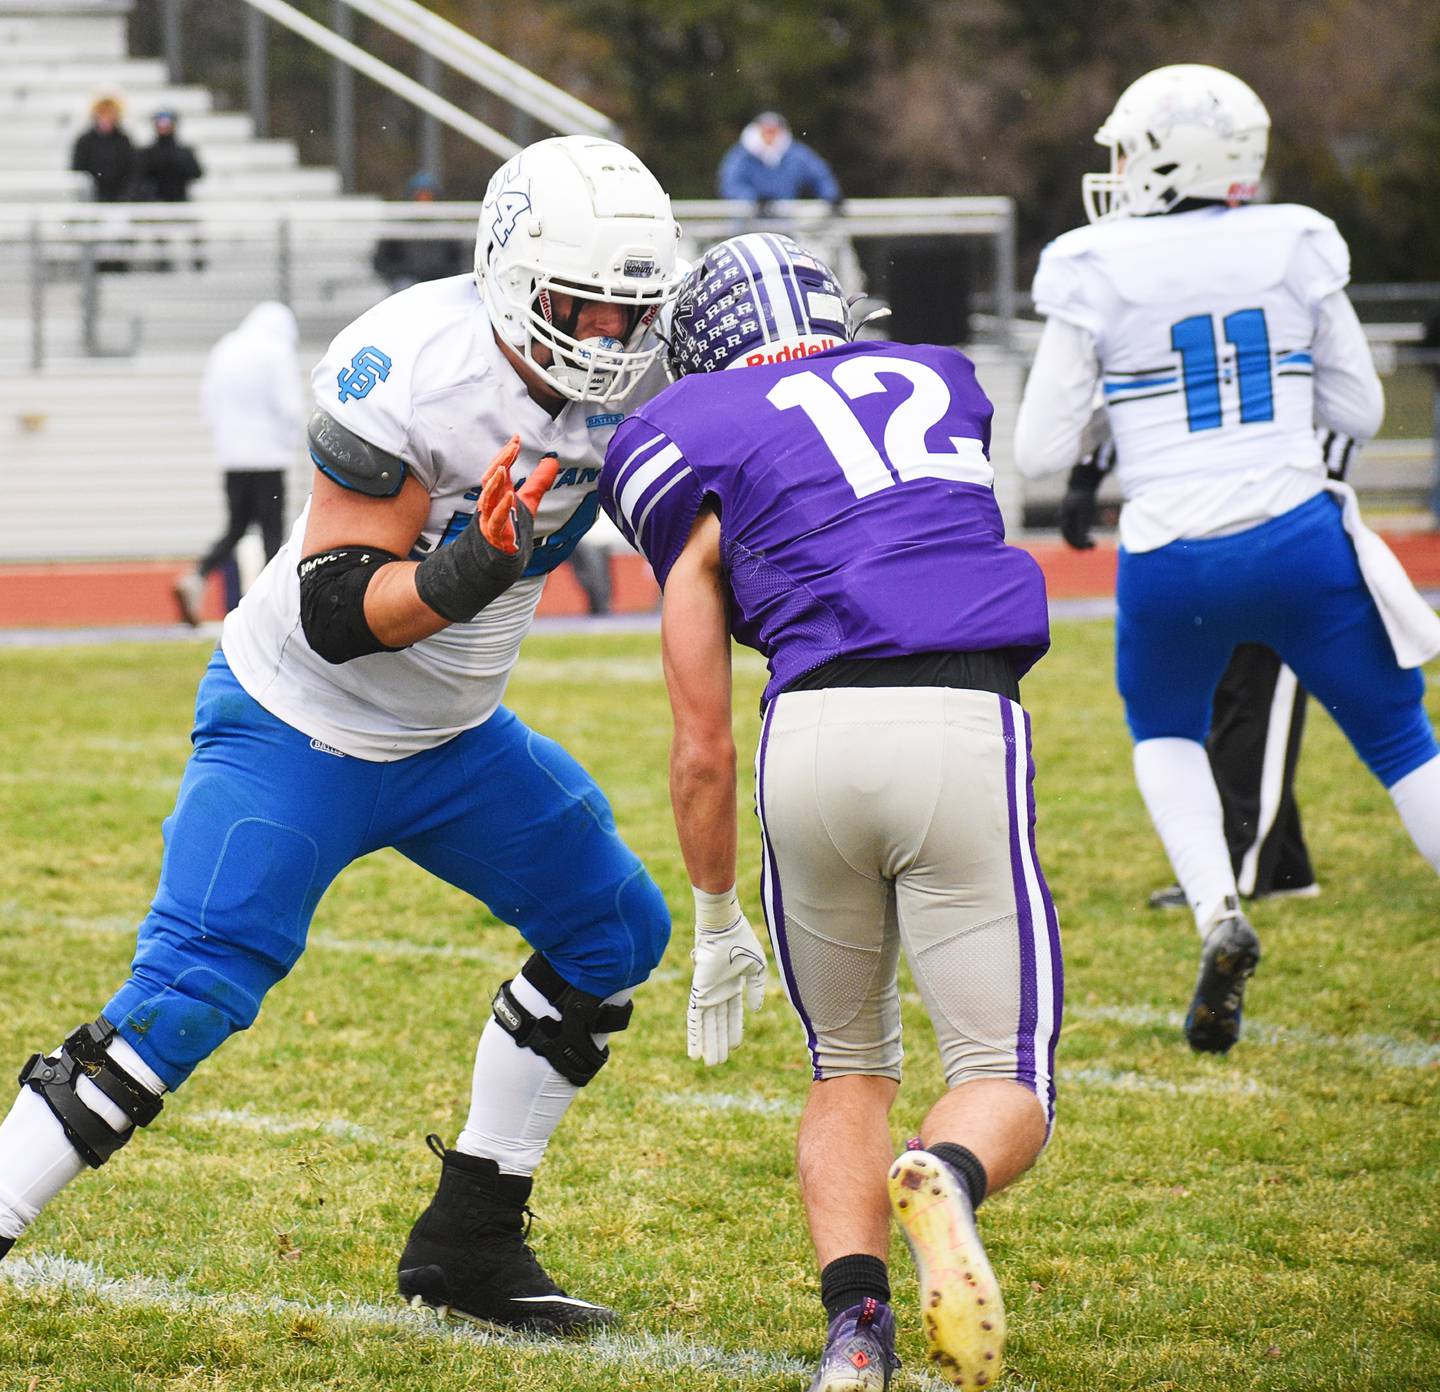 Wheaton St. Francis offensive tackle TJ McMillen blocks Rochelle defensive end Jack Pavlak during Saturday’s Class 4A state quarterfinal game in Rochelle.